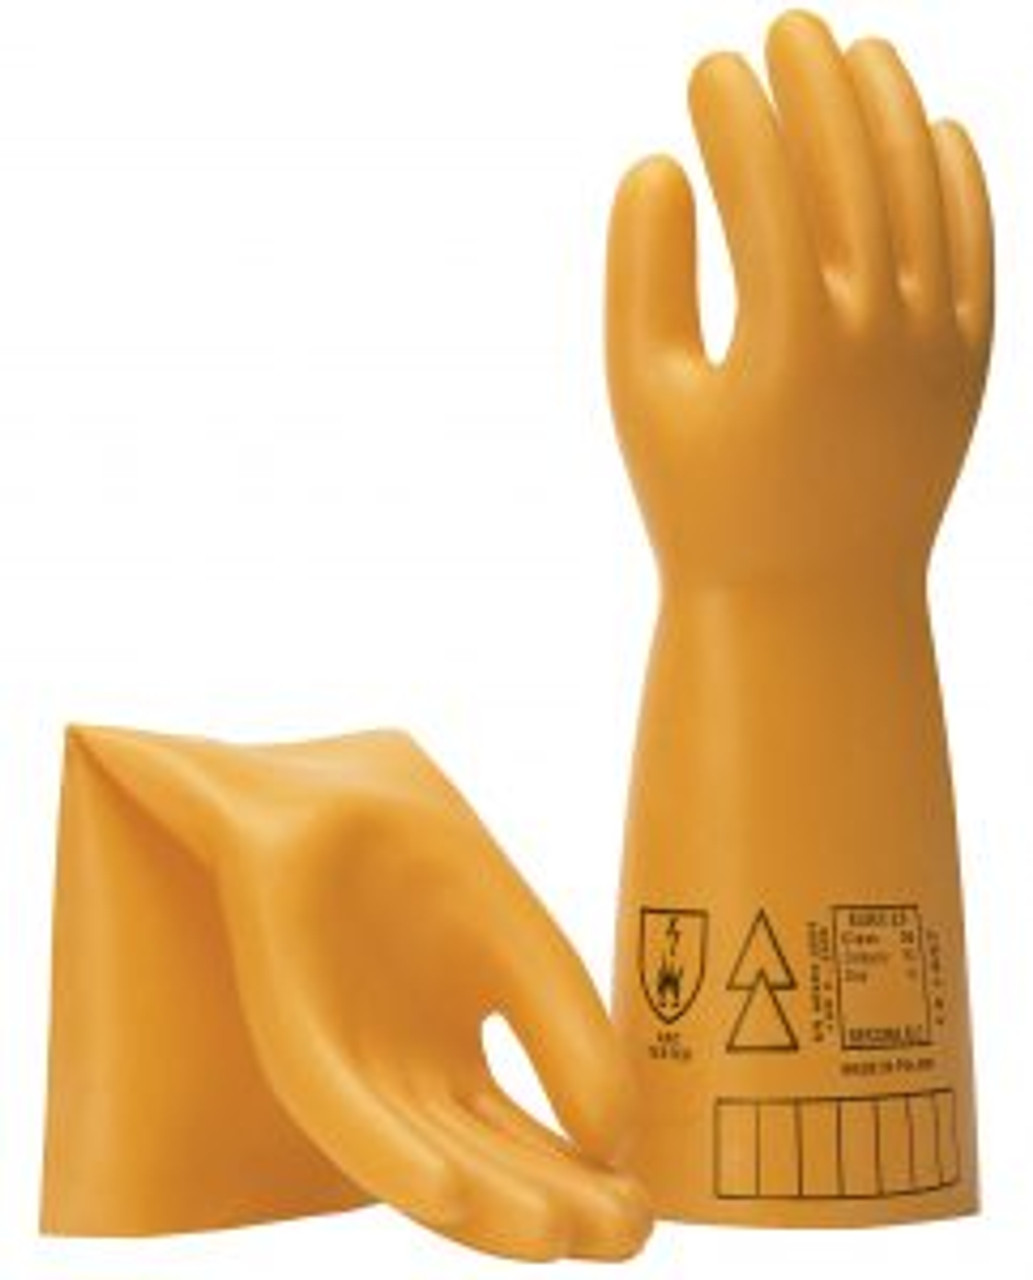 Electrical Insulating Glove, 1000V, 5Kv Class 0 - Size 11